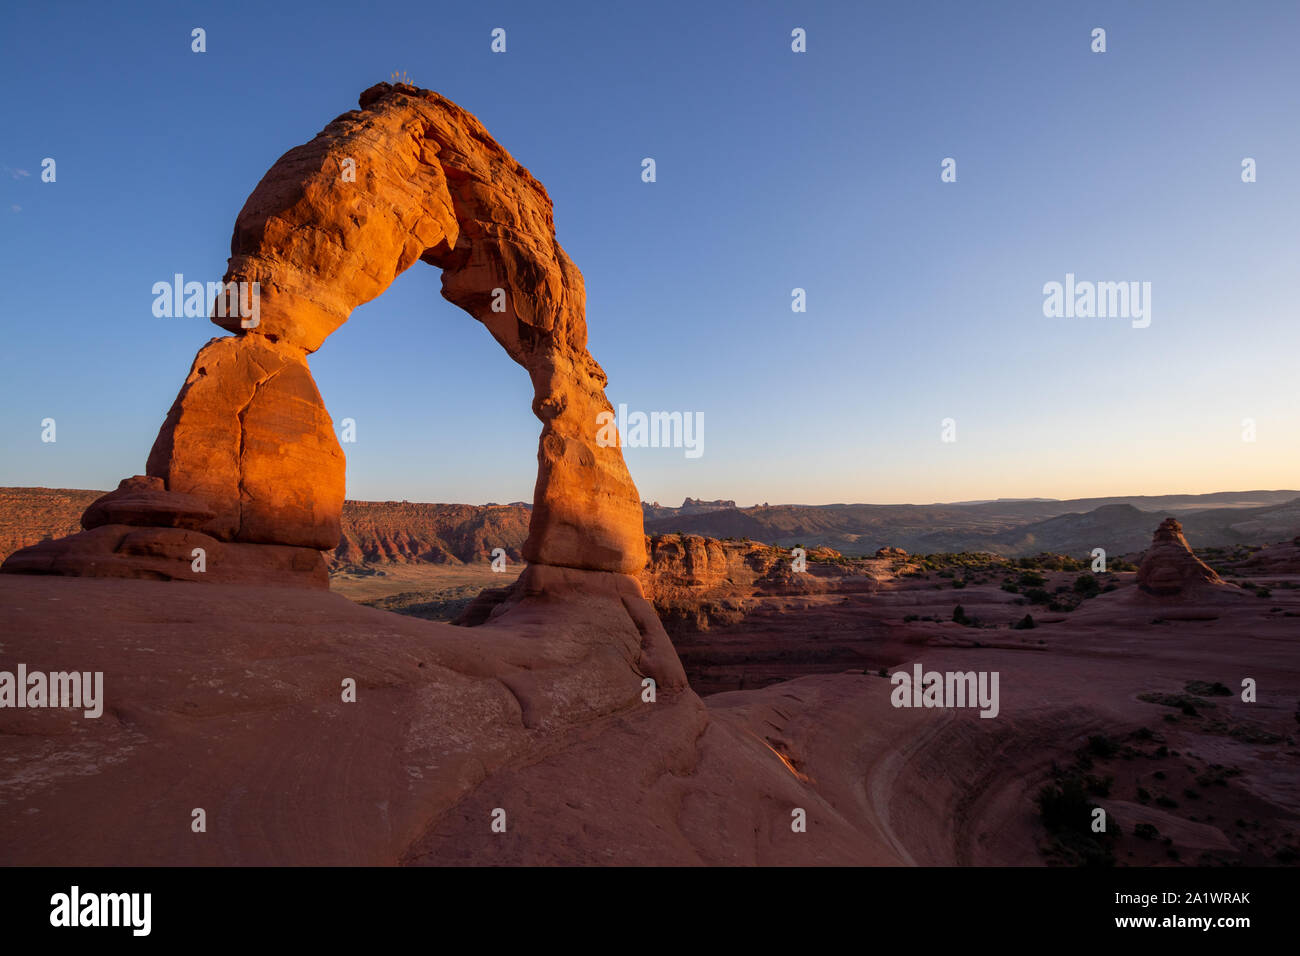 Arches National Park, eastern Utah, United States of America, Delicate Arch, La Sal Mountains, Balanced Rock, tourism, travel destionation. Stock Photo